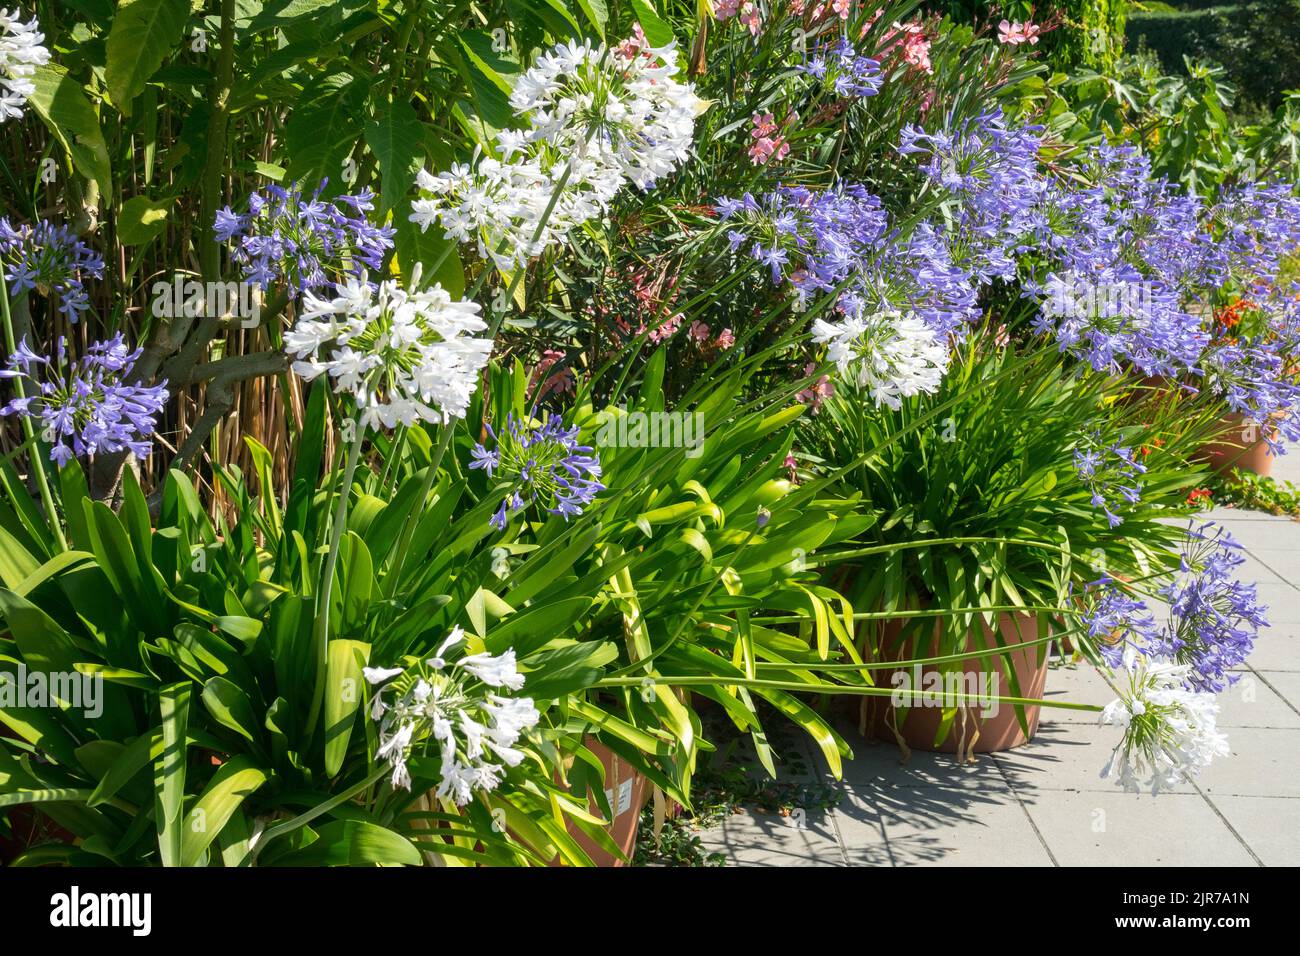 Agapanthus pot Summer garden terrace Blooming African Blue Lily of the Nile Agapanthus Pots White Agapanthus 'Albus' Flowers African Lily Flowering Stock Photo